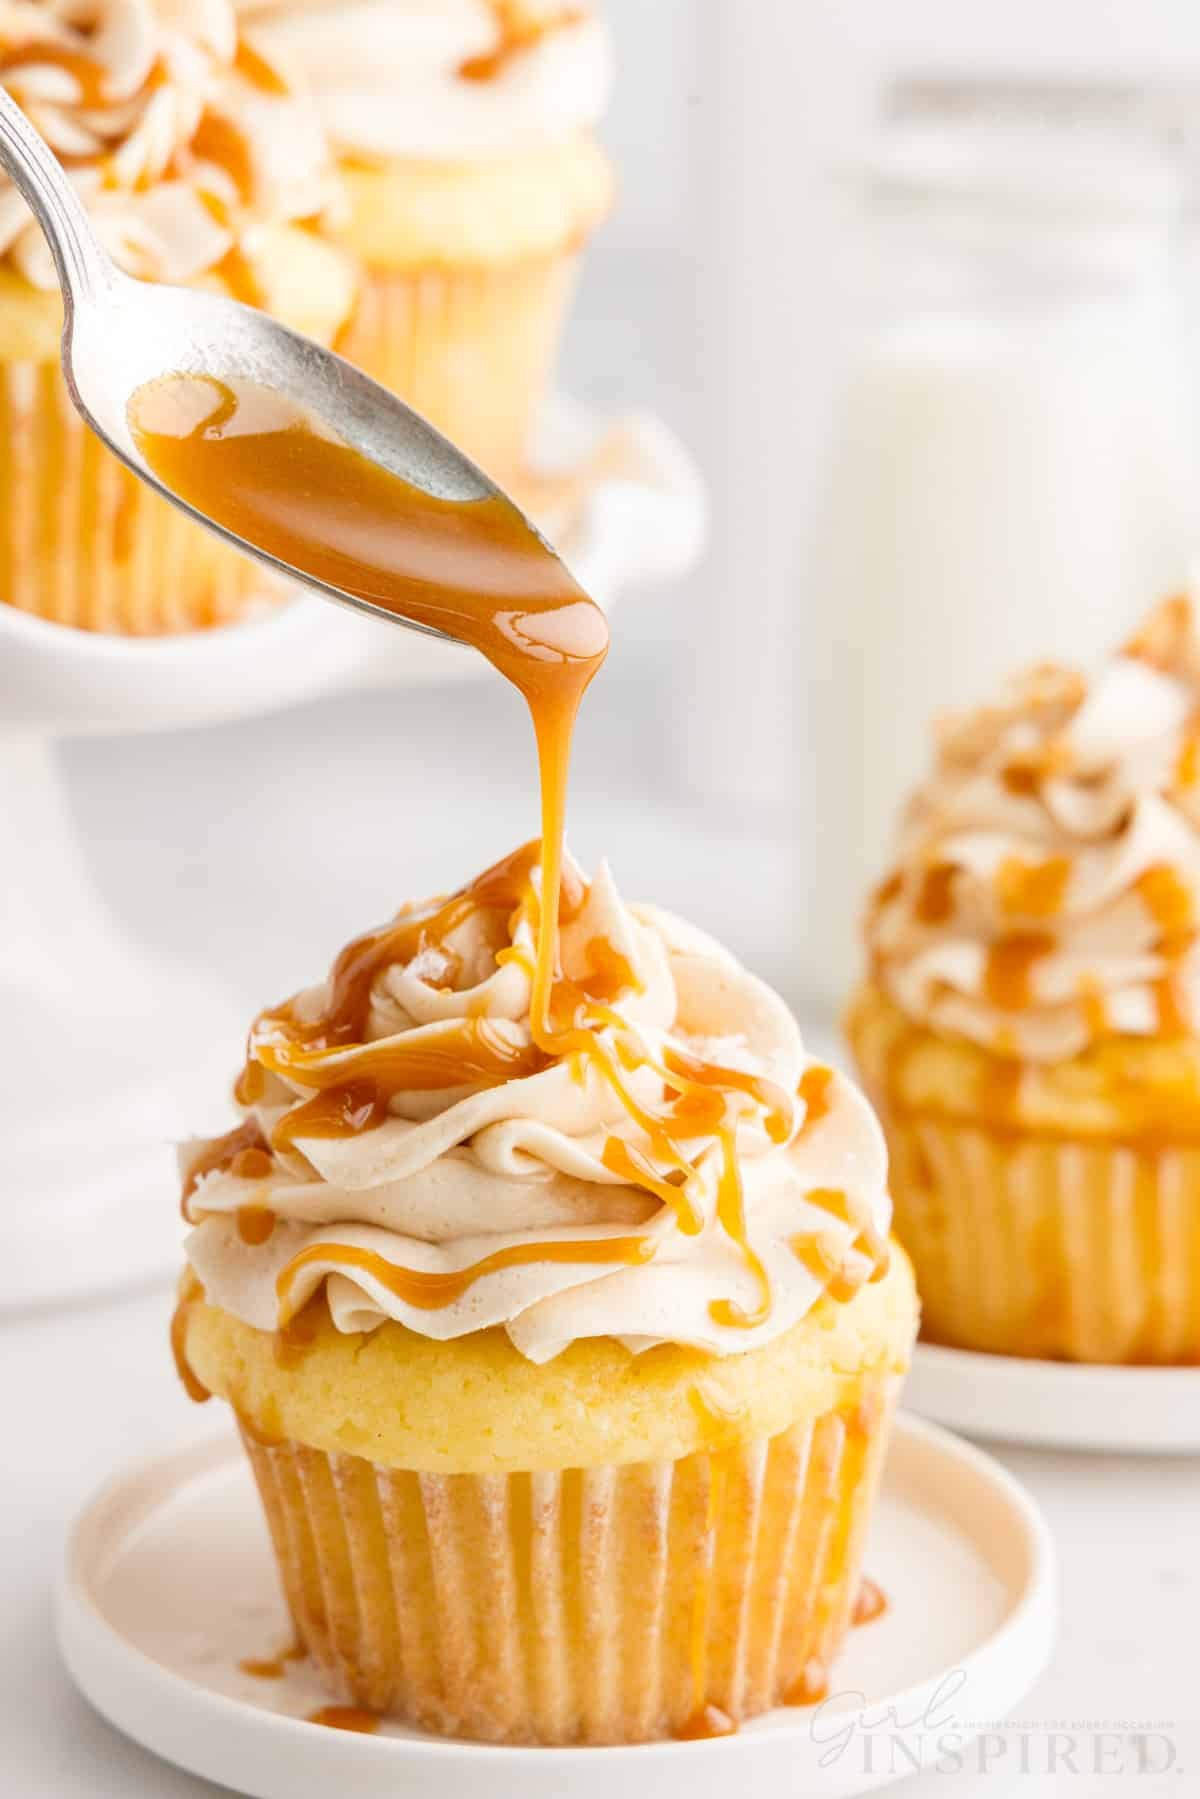 Caramel drizzled from a spoon onto a Salted Caramel Cupcake.